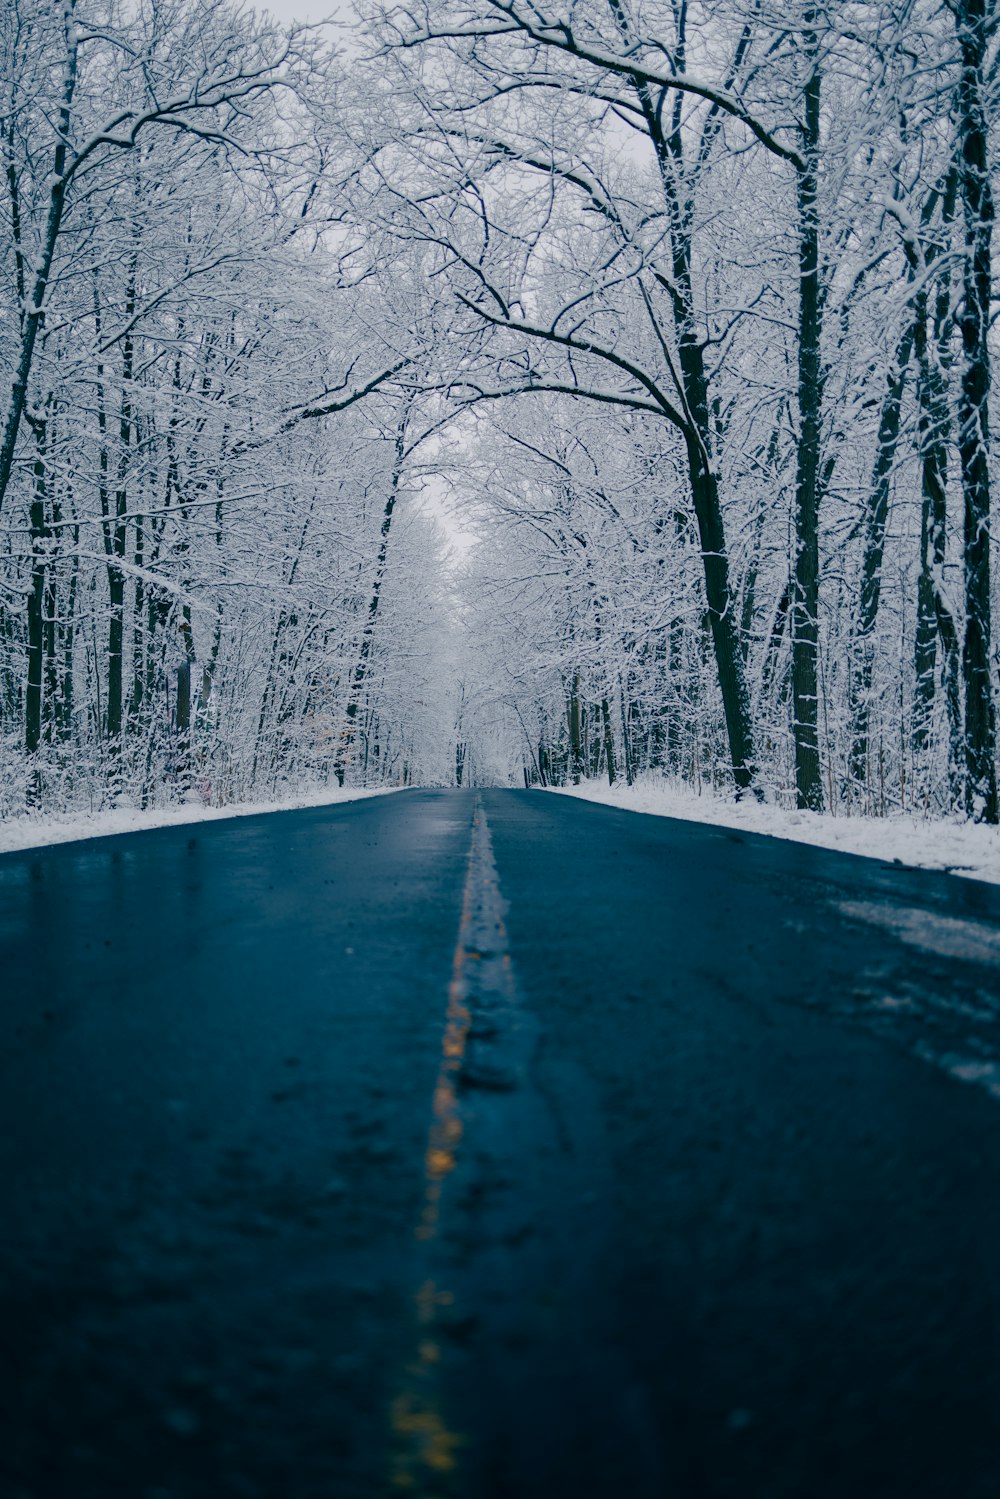 a road with snow on the ground and trees on both sides